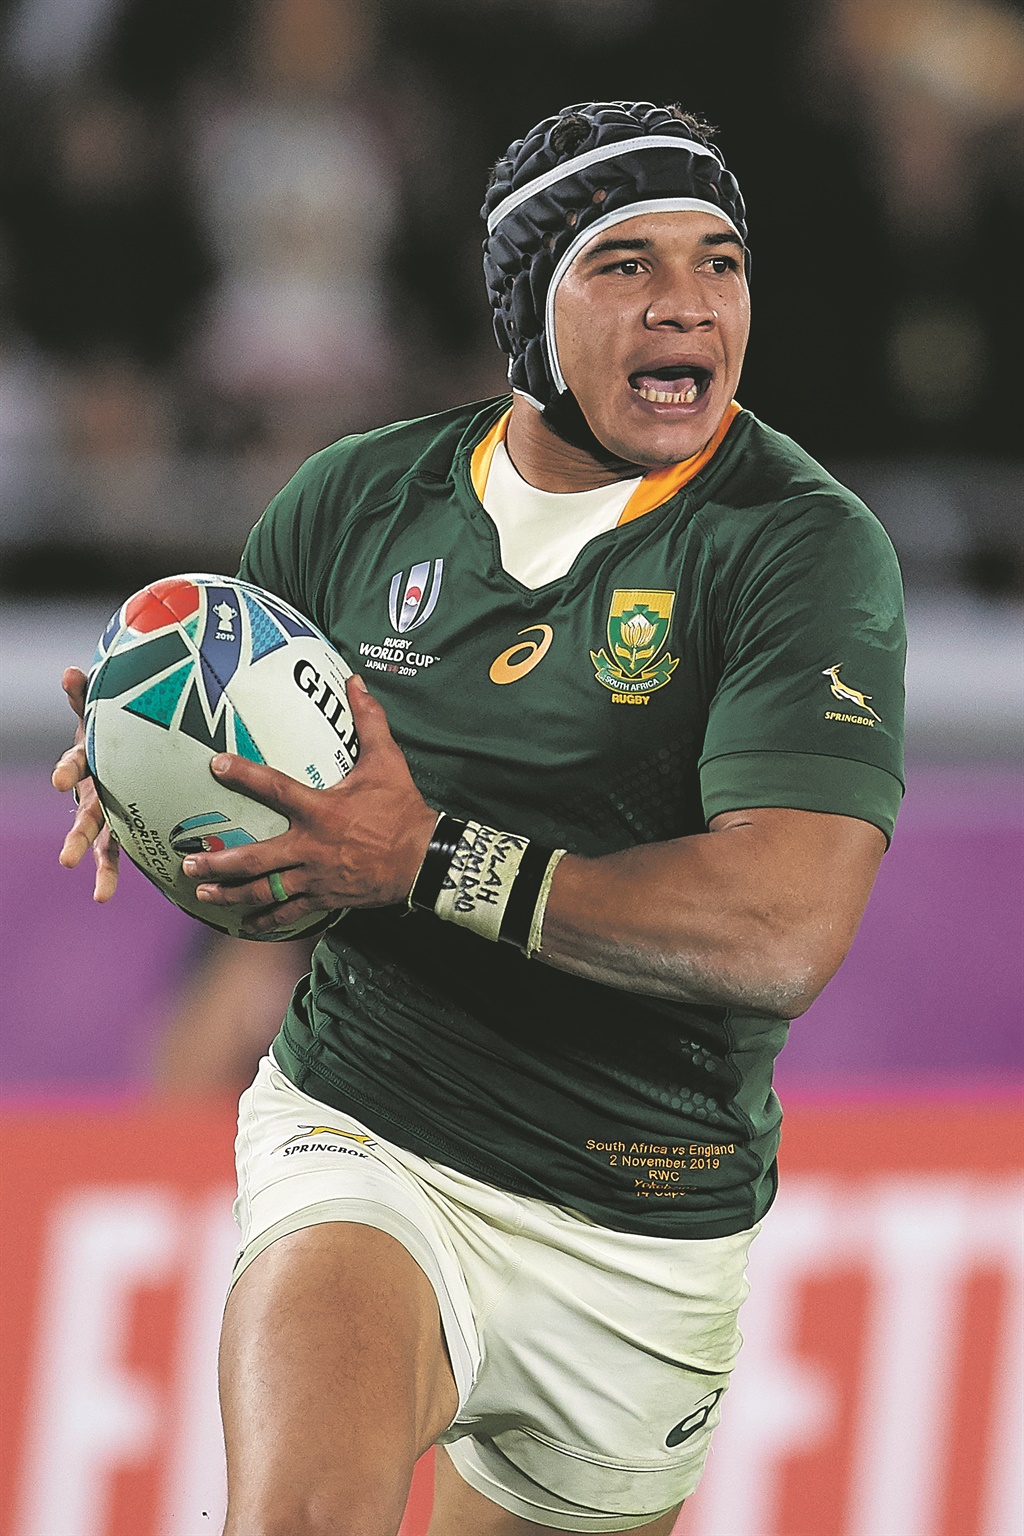 Cheslin Kolbe could be left behind when Team SA go to the Games in Tokyo later this year. Pictures: Pablo Morano / Getty Images